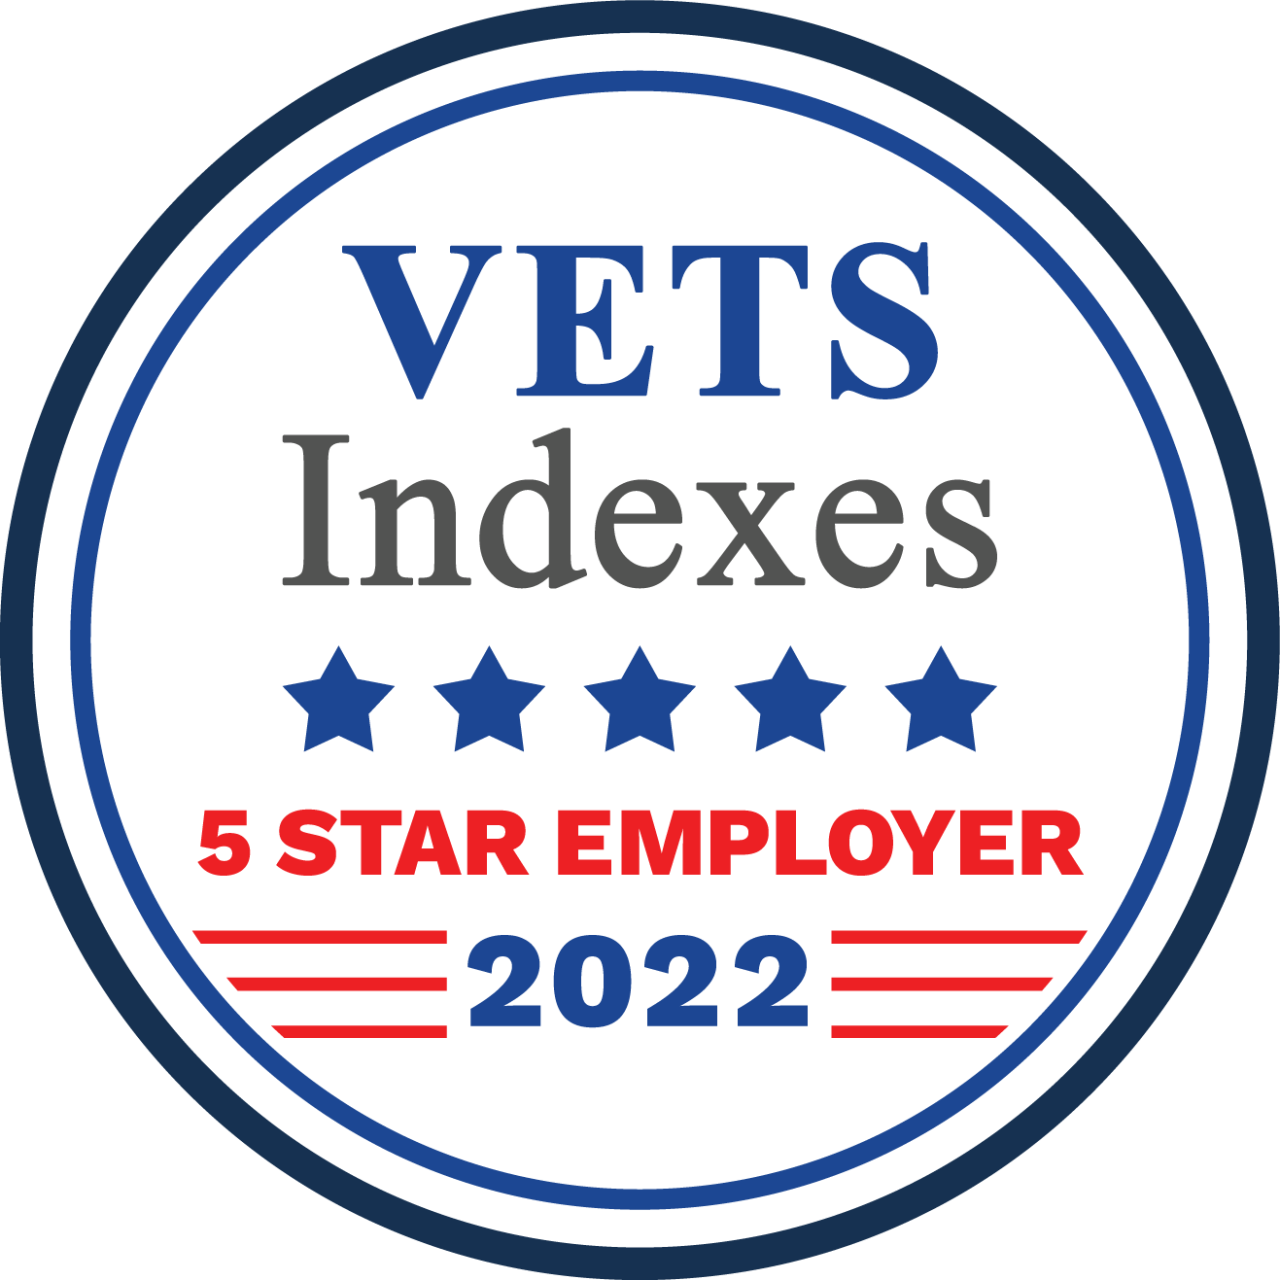 VETS Indexes 5 Star Employer 2022